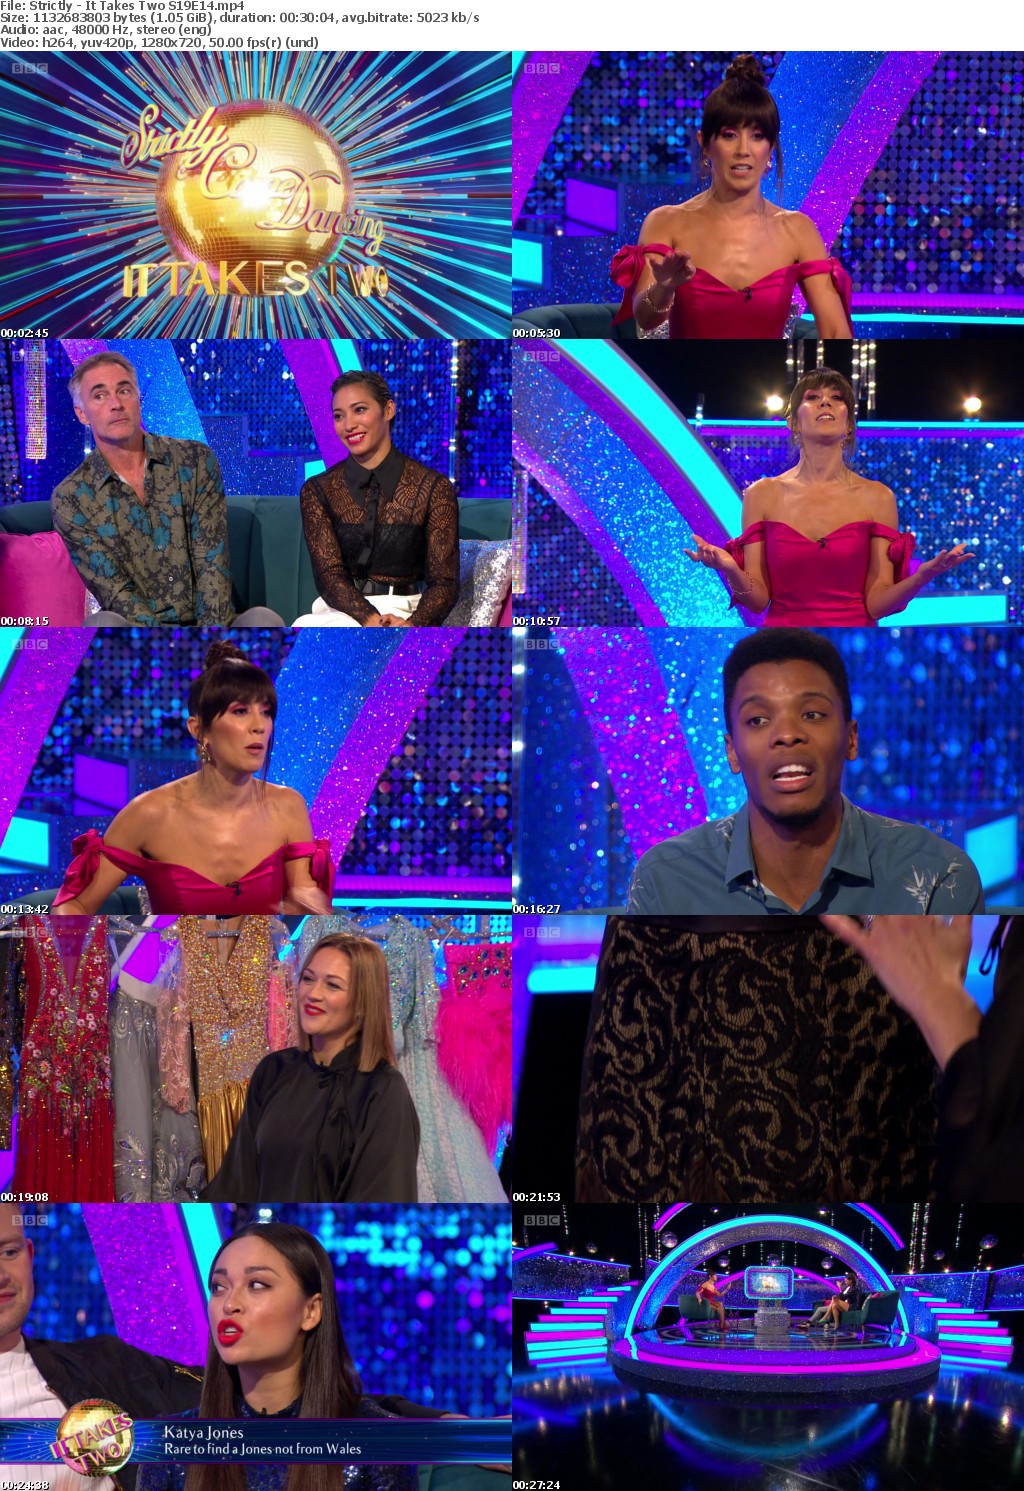 Strictly - It Takes Two S19E14 (1280x720p HD, 50fps, soft Eng subs)